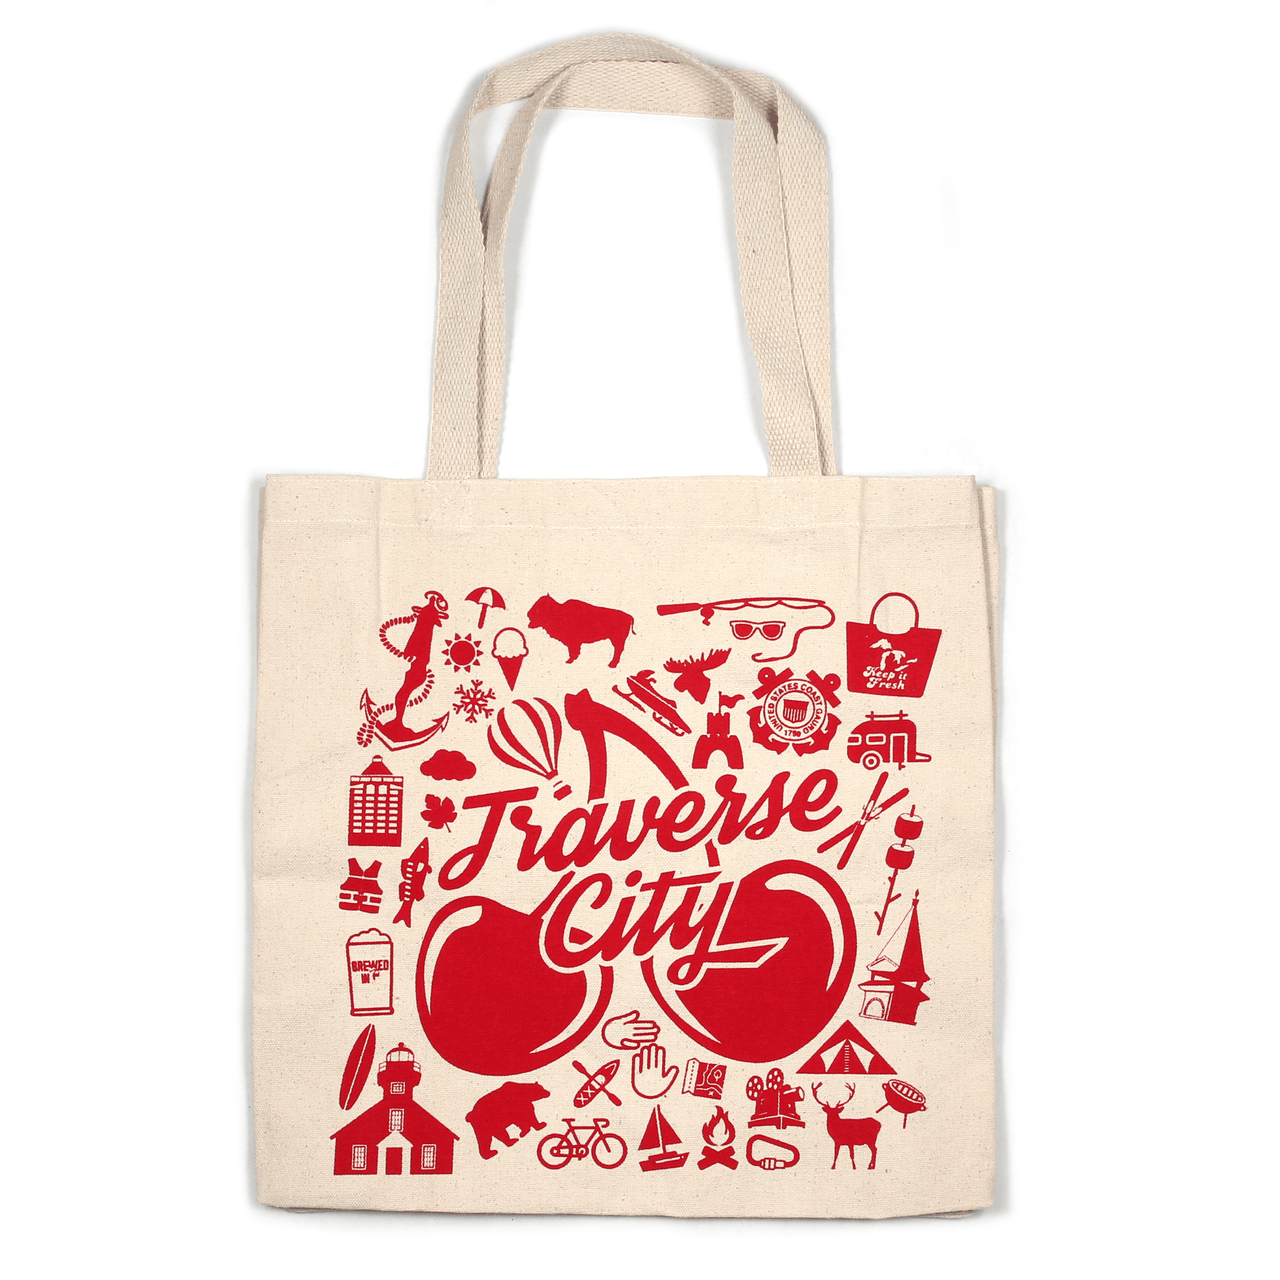 Traverse City: More Than Cherries Tote